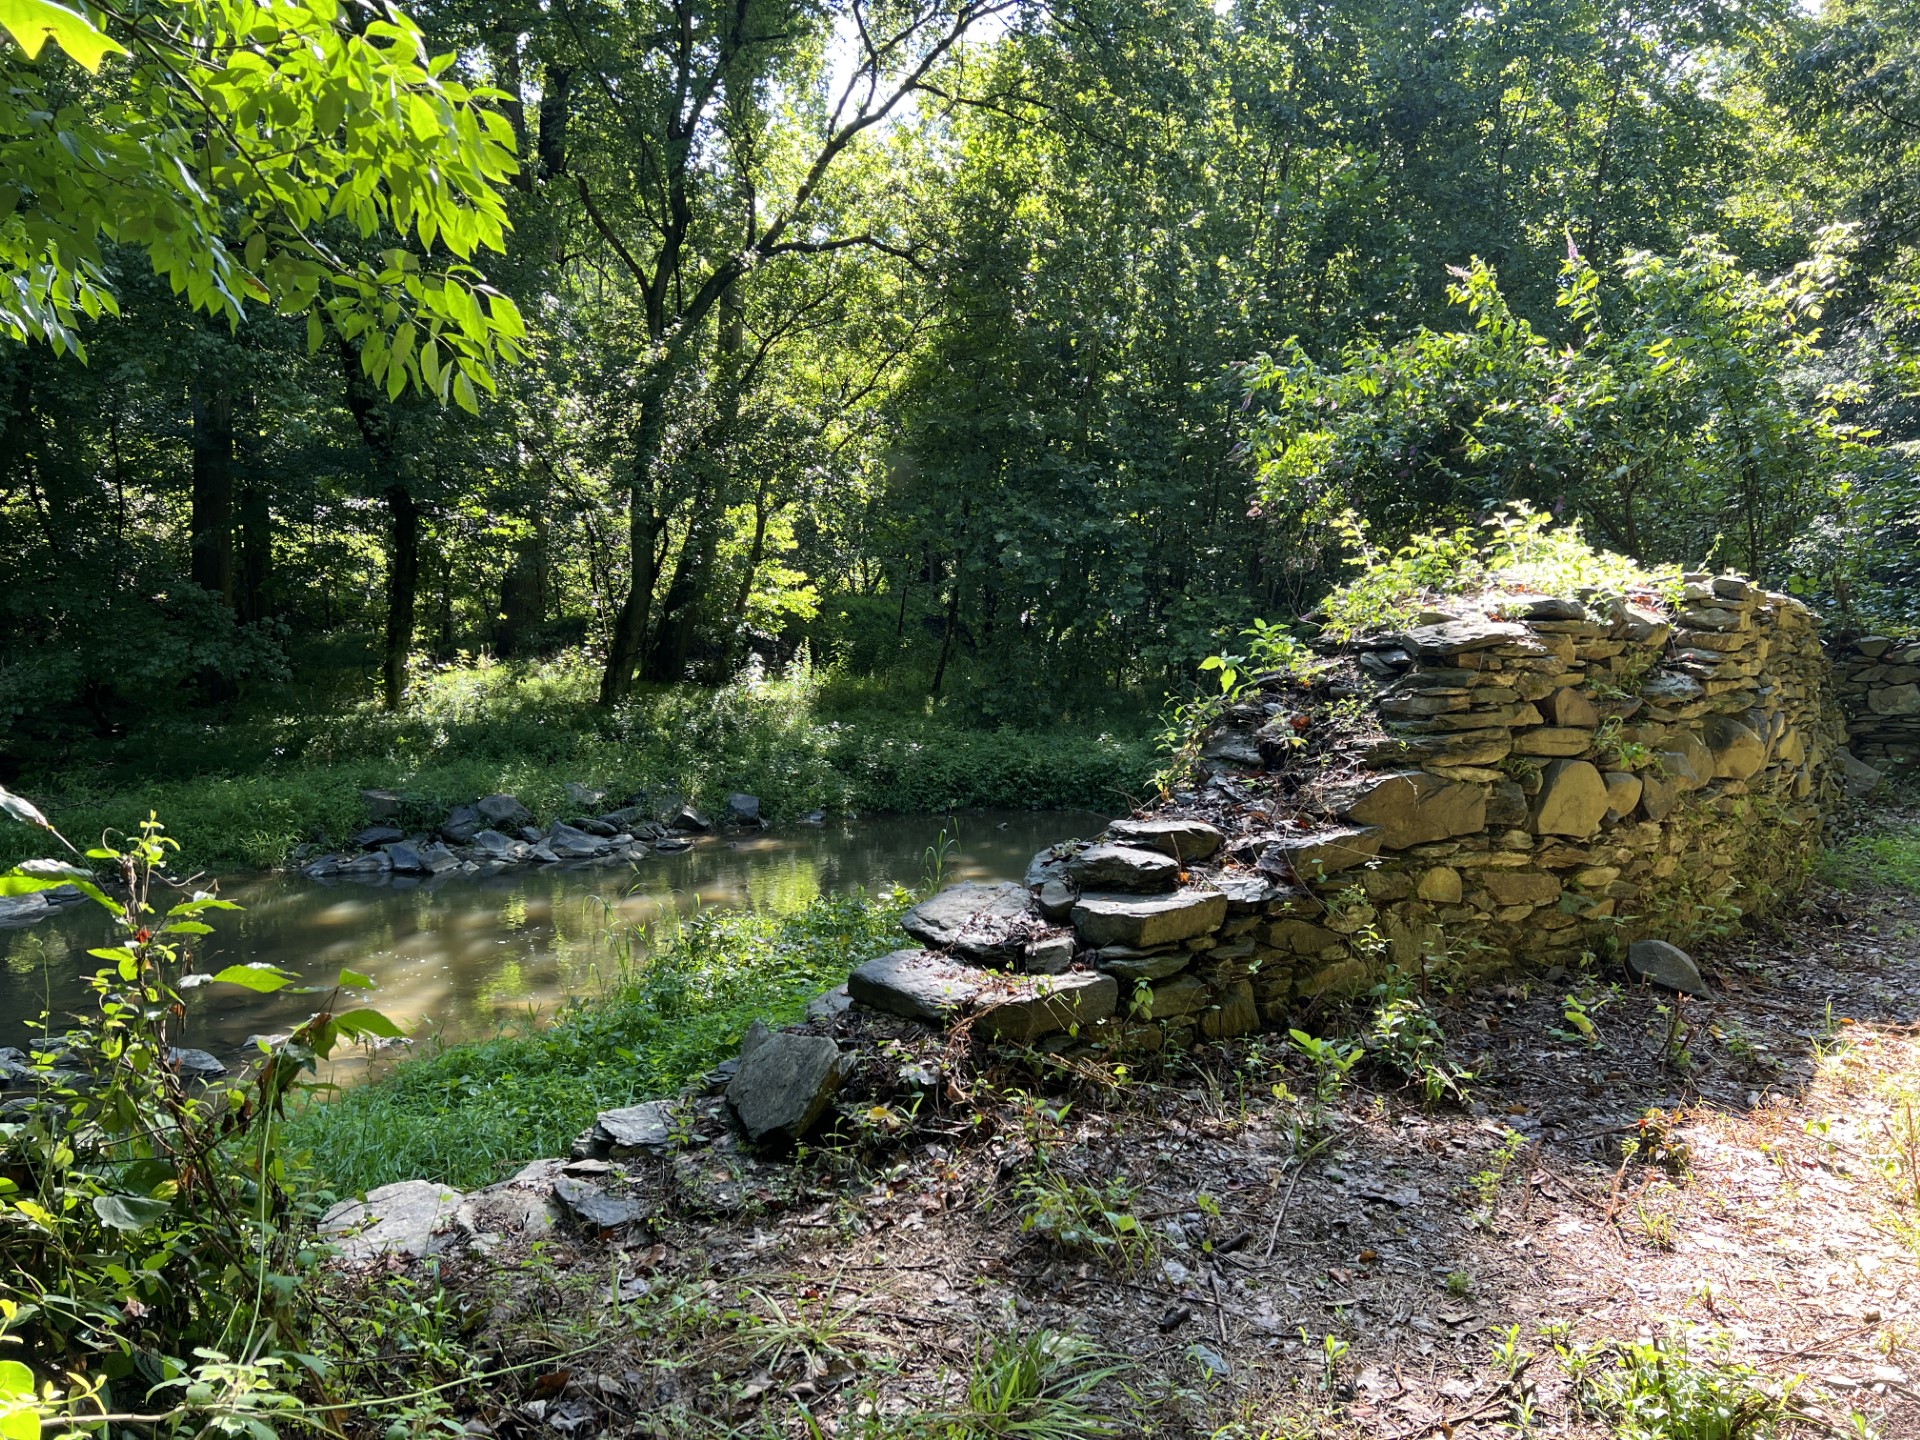 A ruined wall of stone by the river.